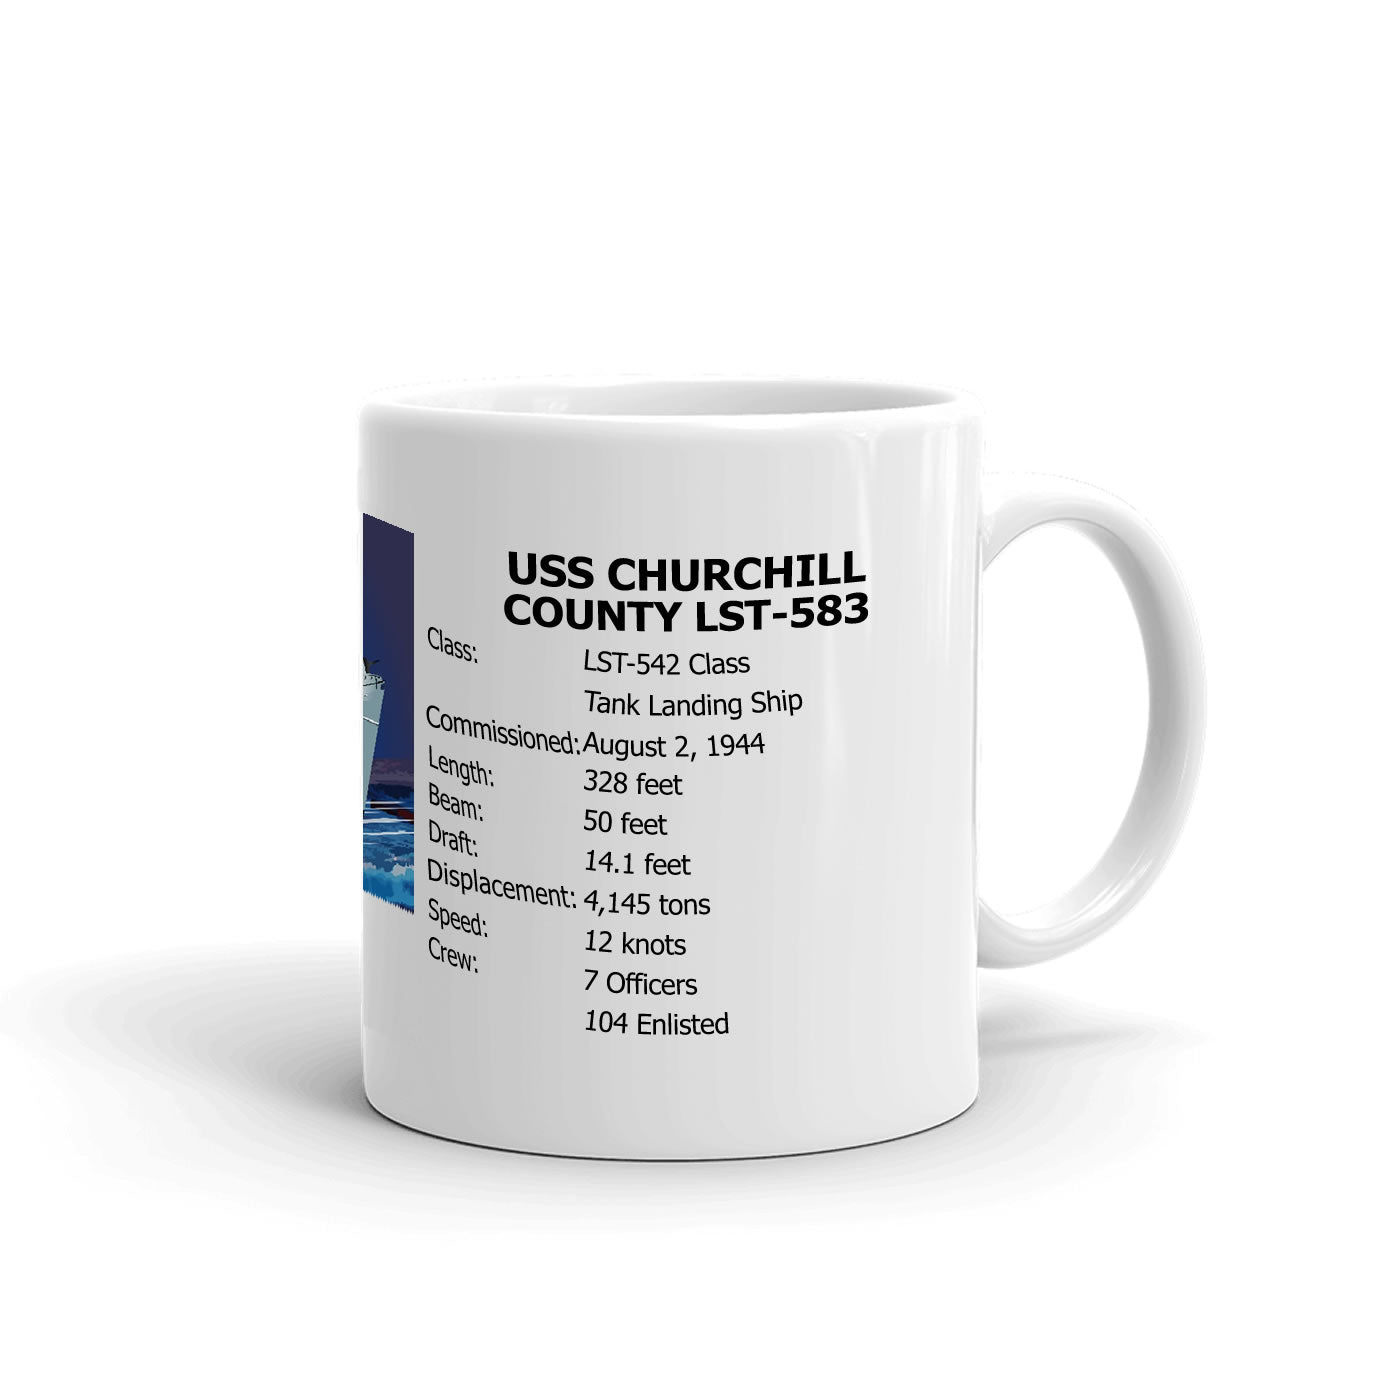 USS Churchill County LST-583 Coffee Cup Mug Right Handle